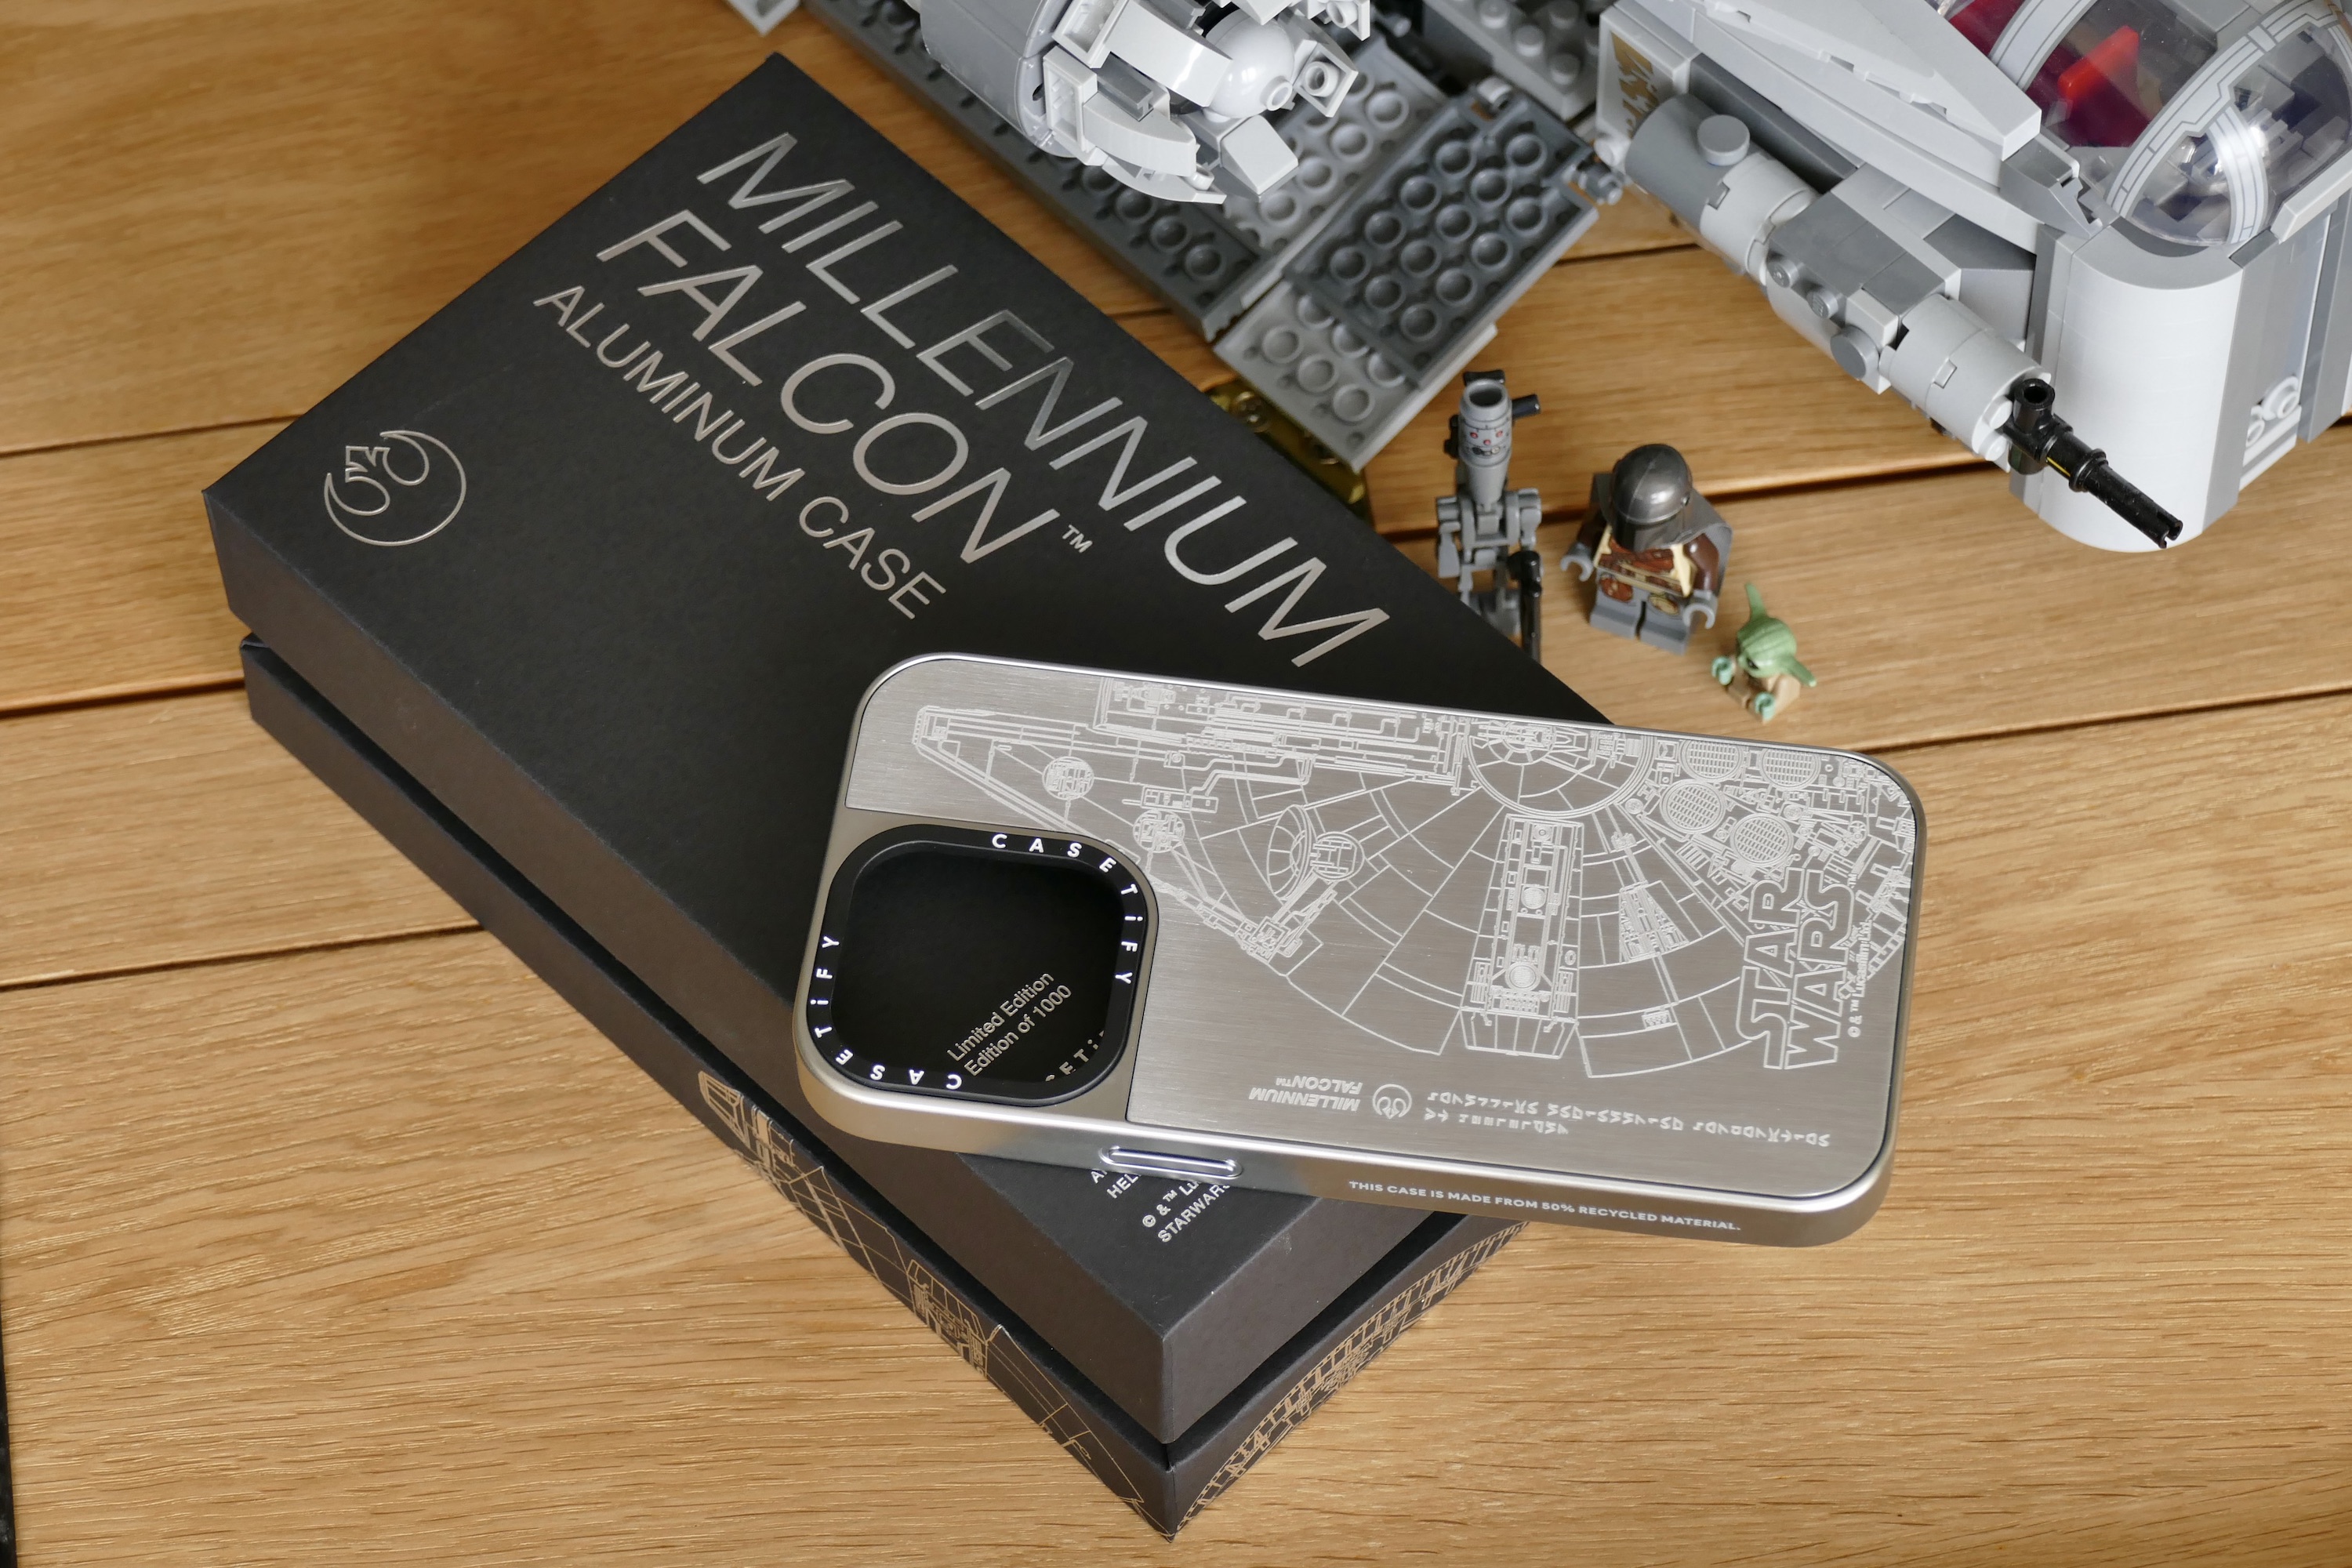 Casetify's metal Millennium Falcon iPhone case with its box.